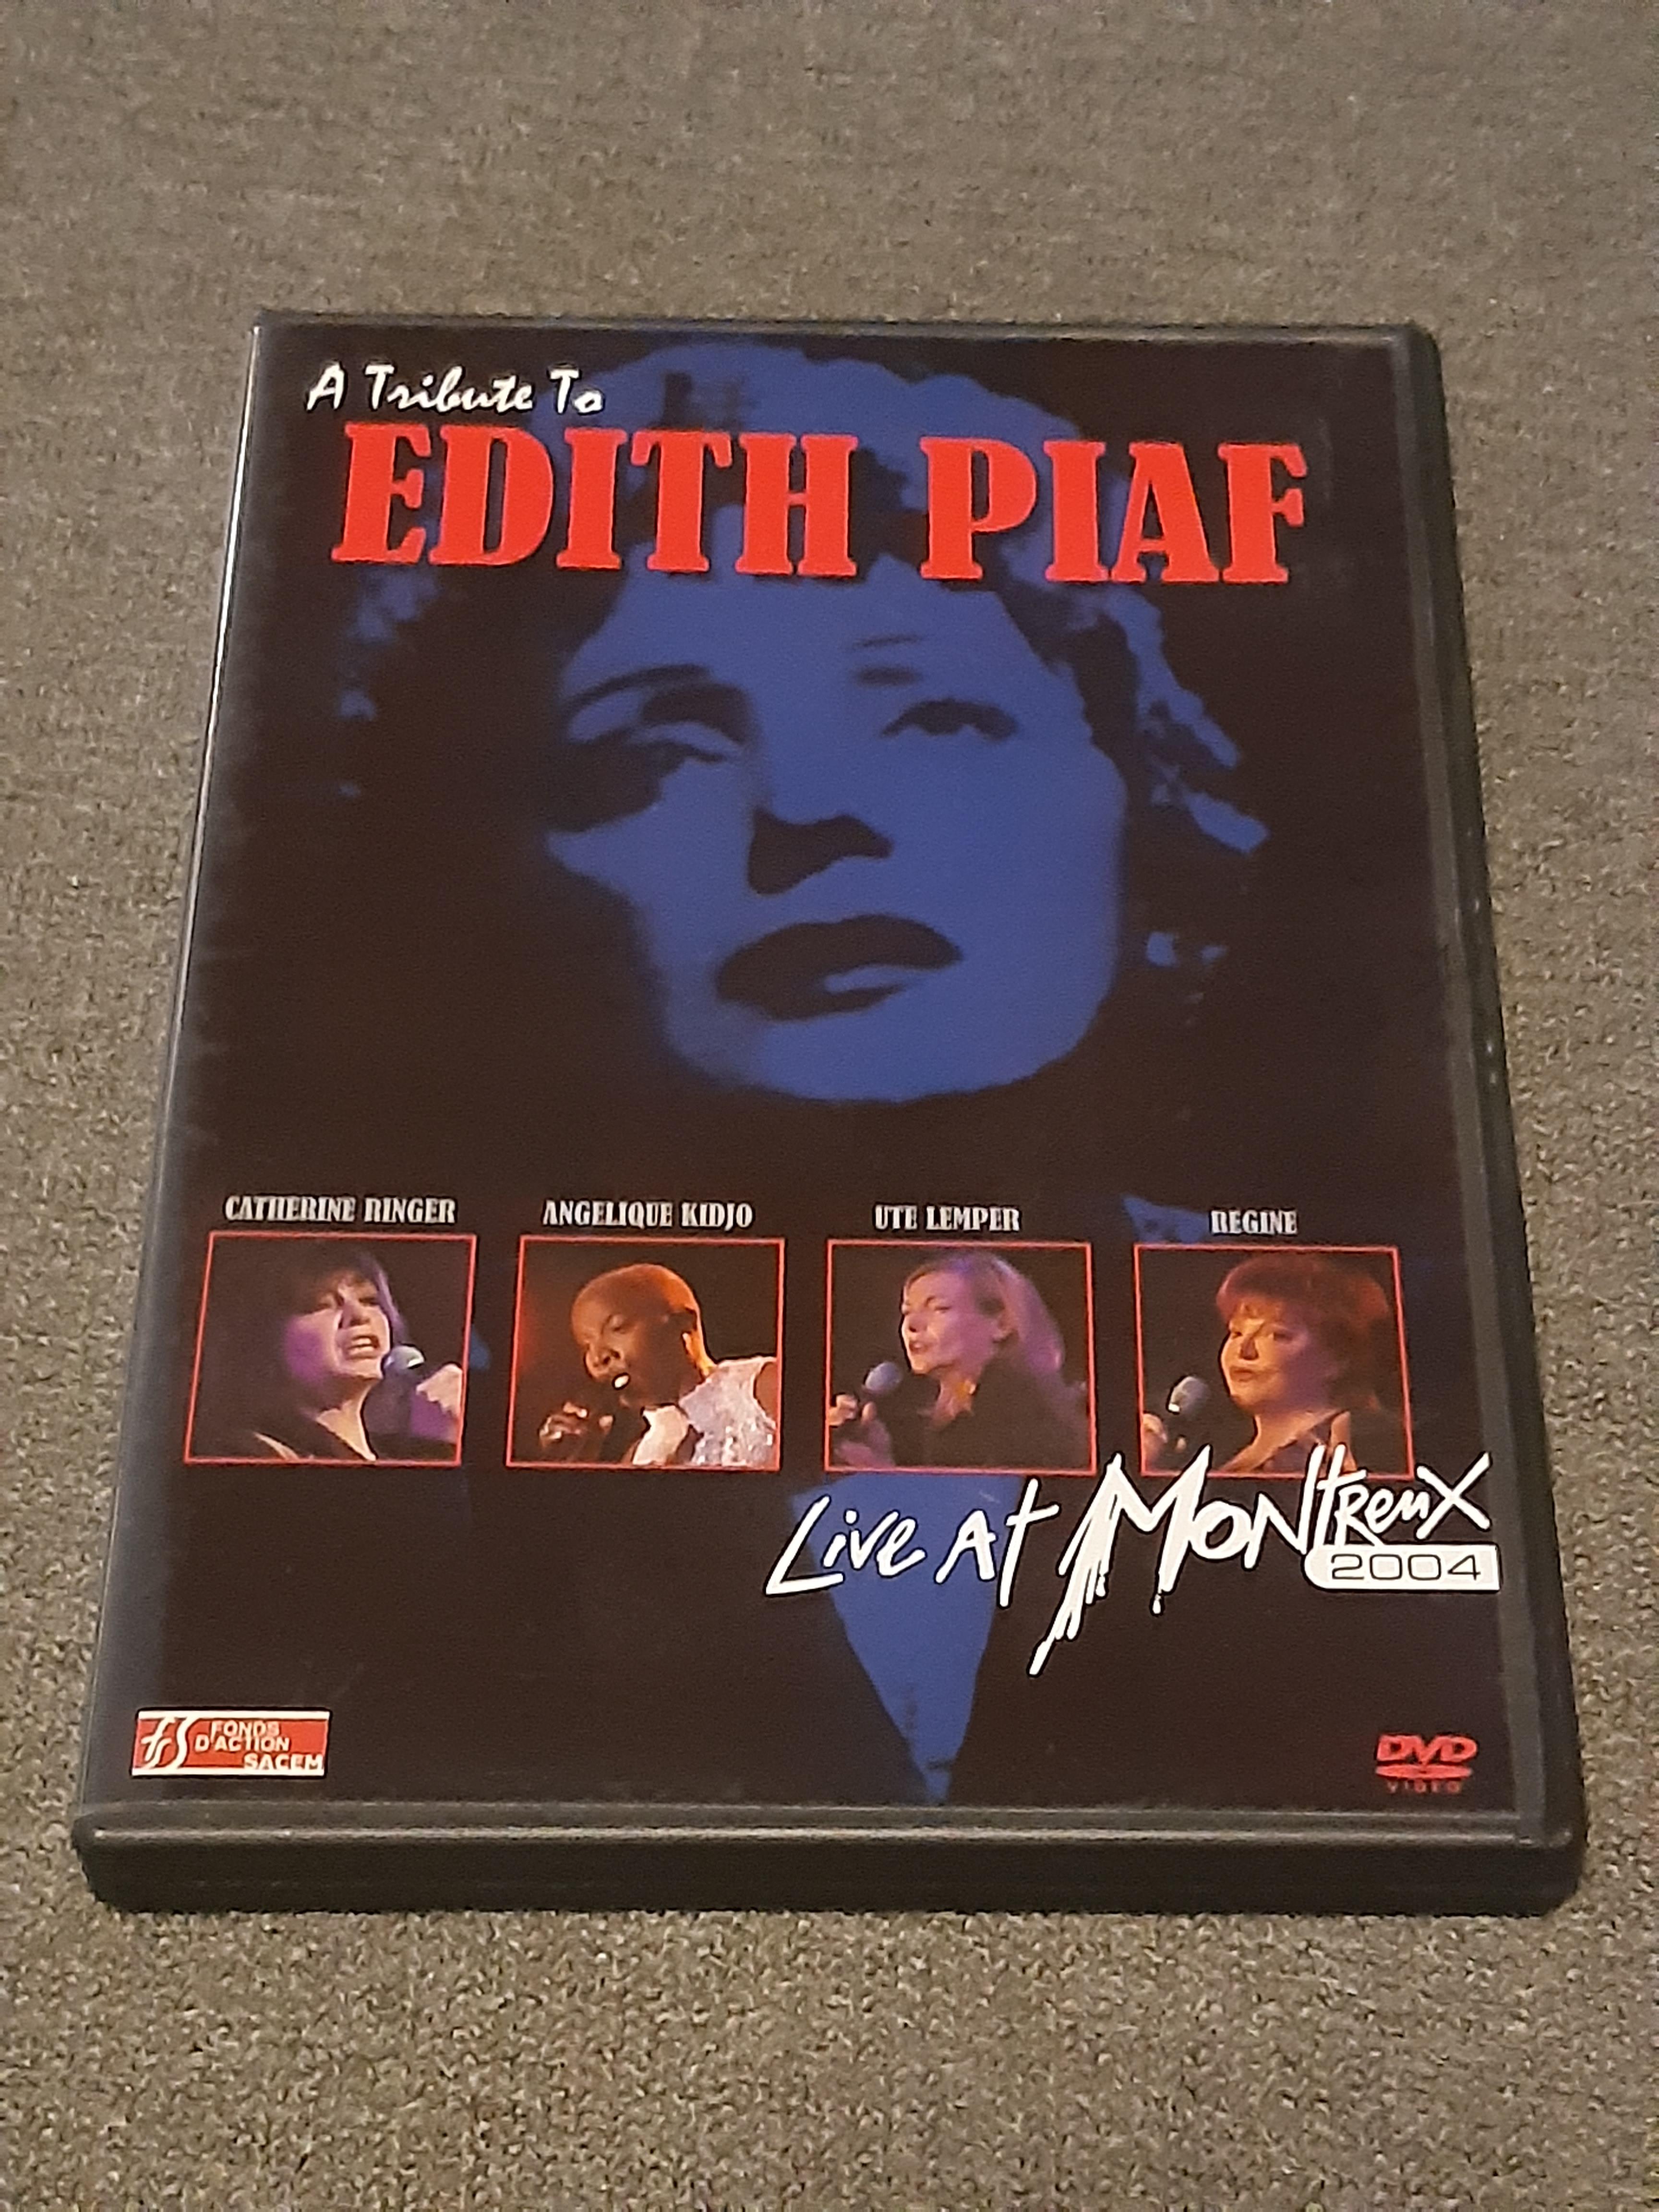 A Tribute To Edith Piaf - Live At Montreux 2004 - DVD (käytetty)